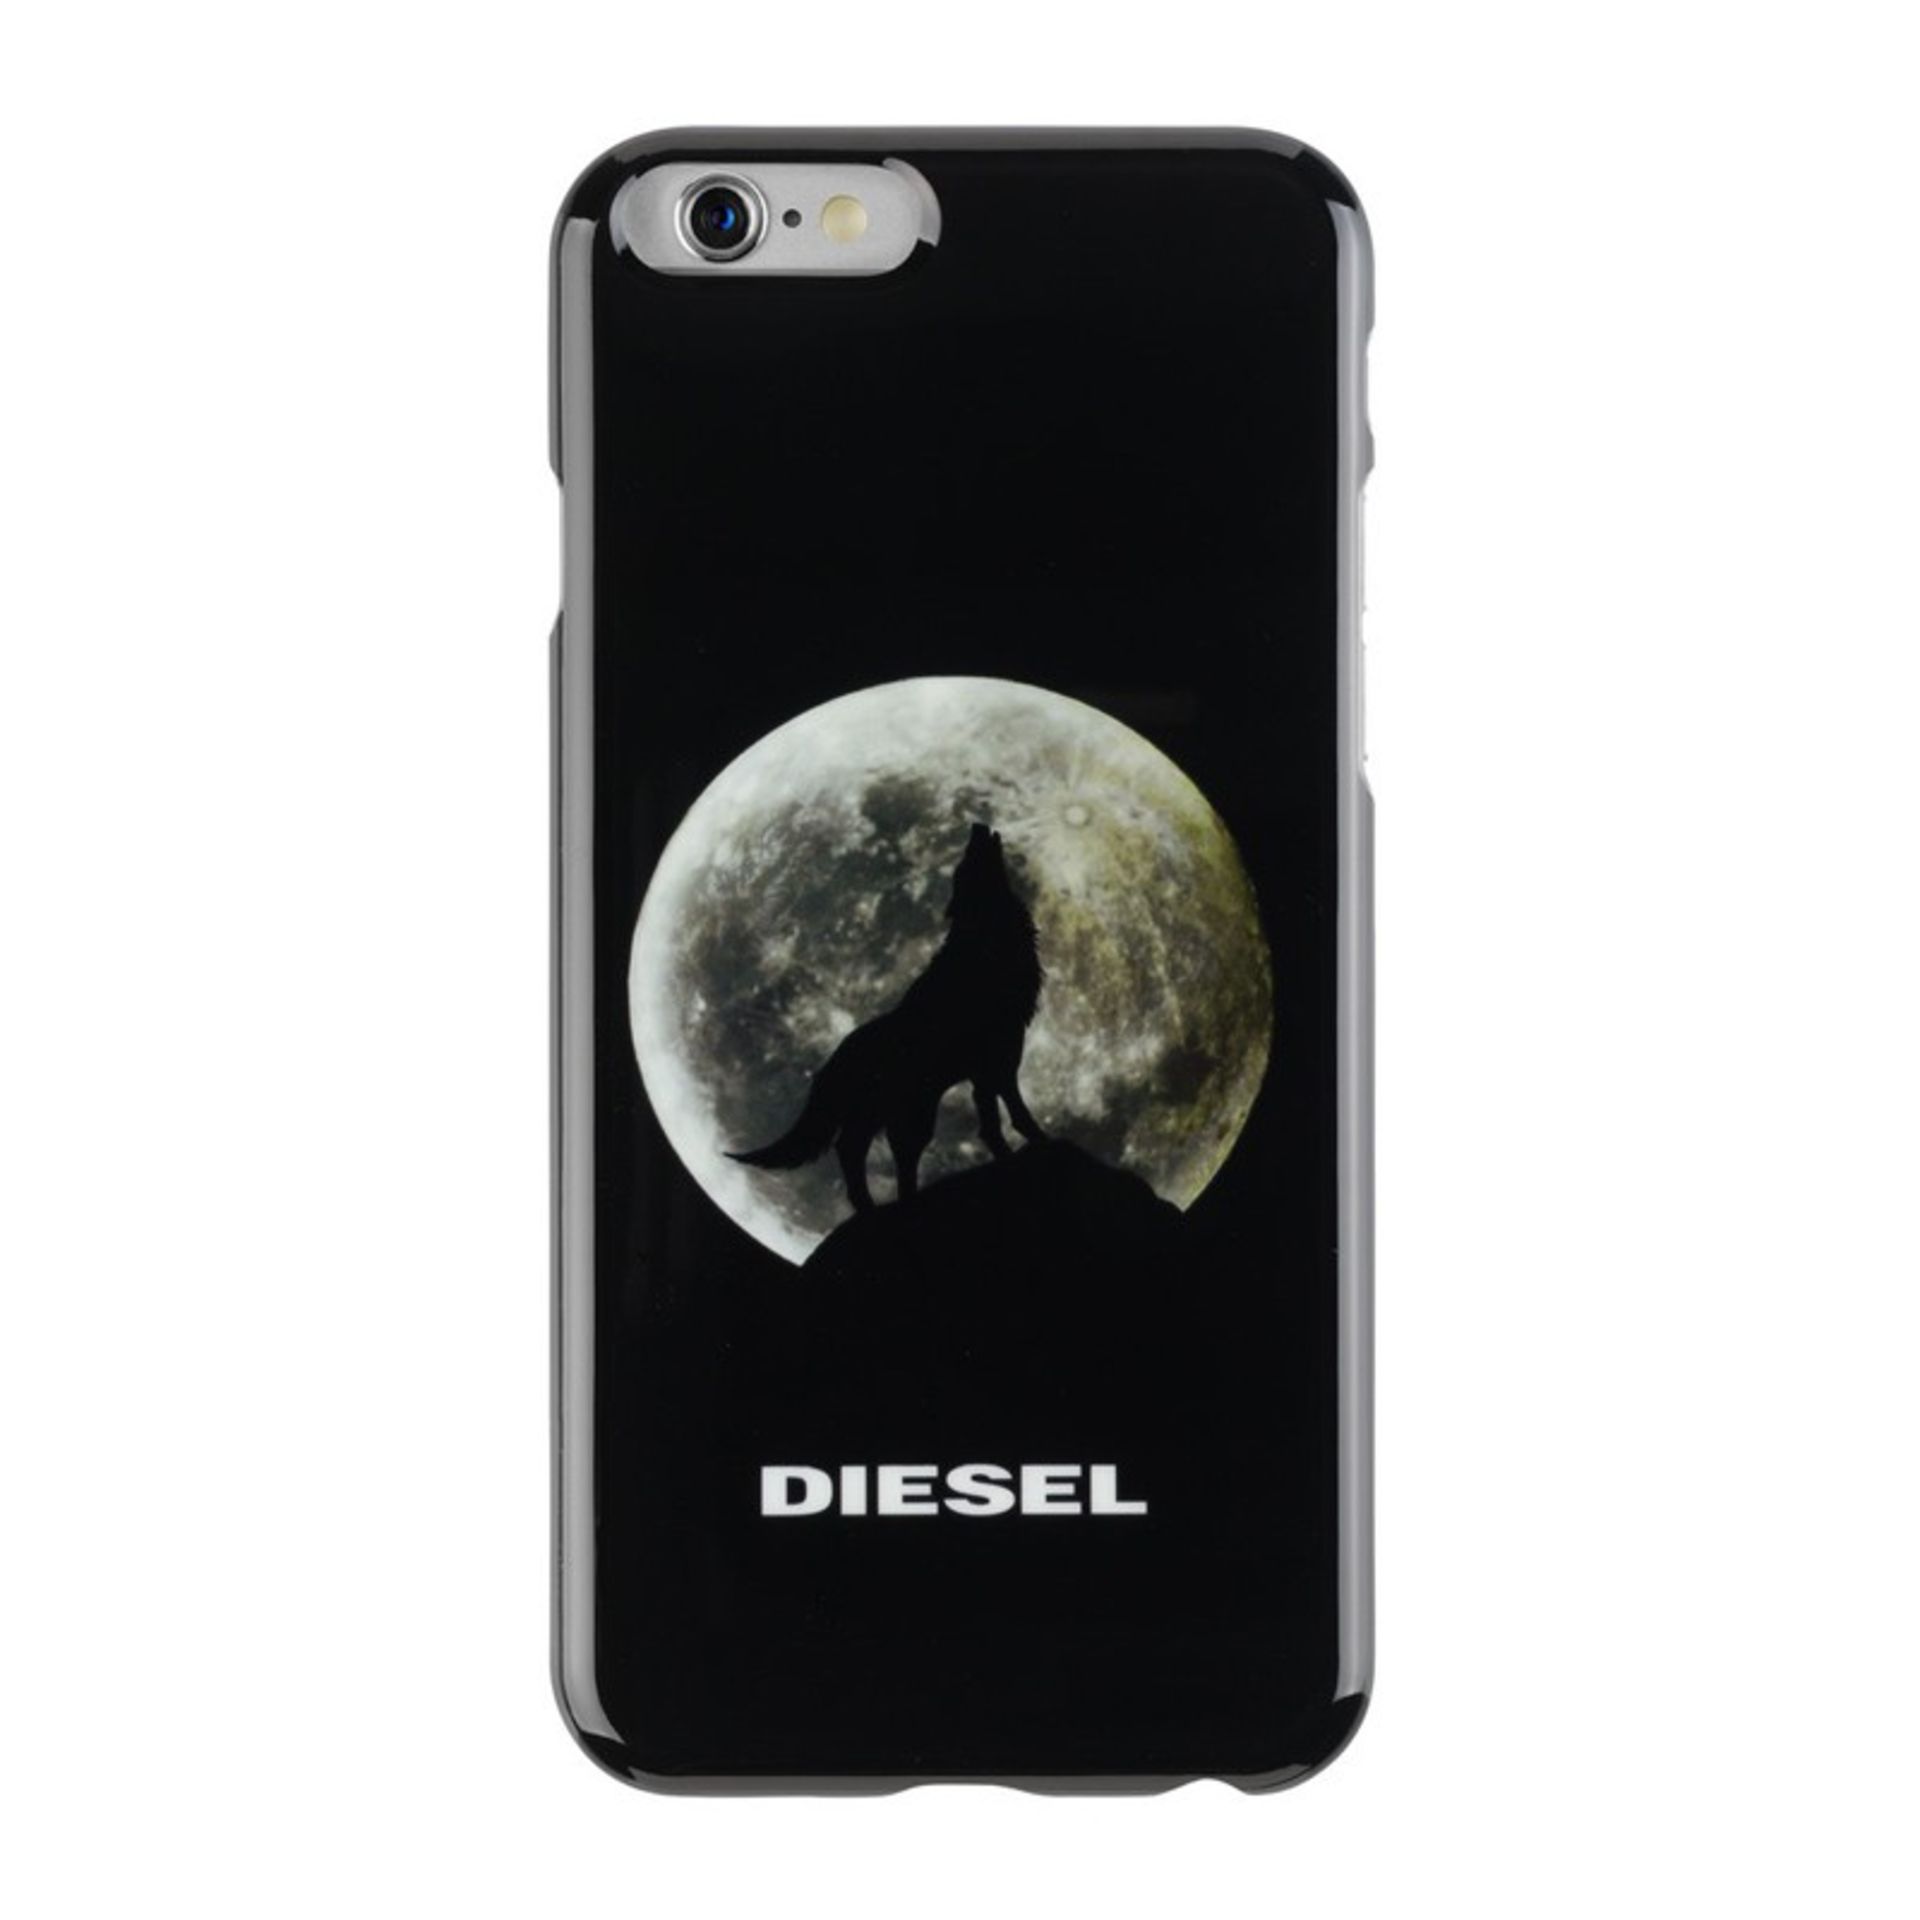 V *TRADE QTY* Brand New Diesel Pluton 6 Hard Snap Case For iPhone 6 ISP Price 19.90 Euros X 8 YOUR